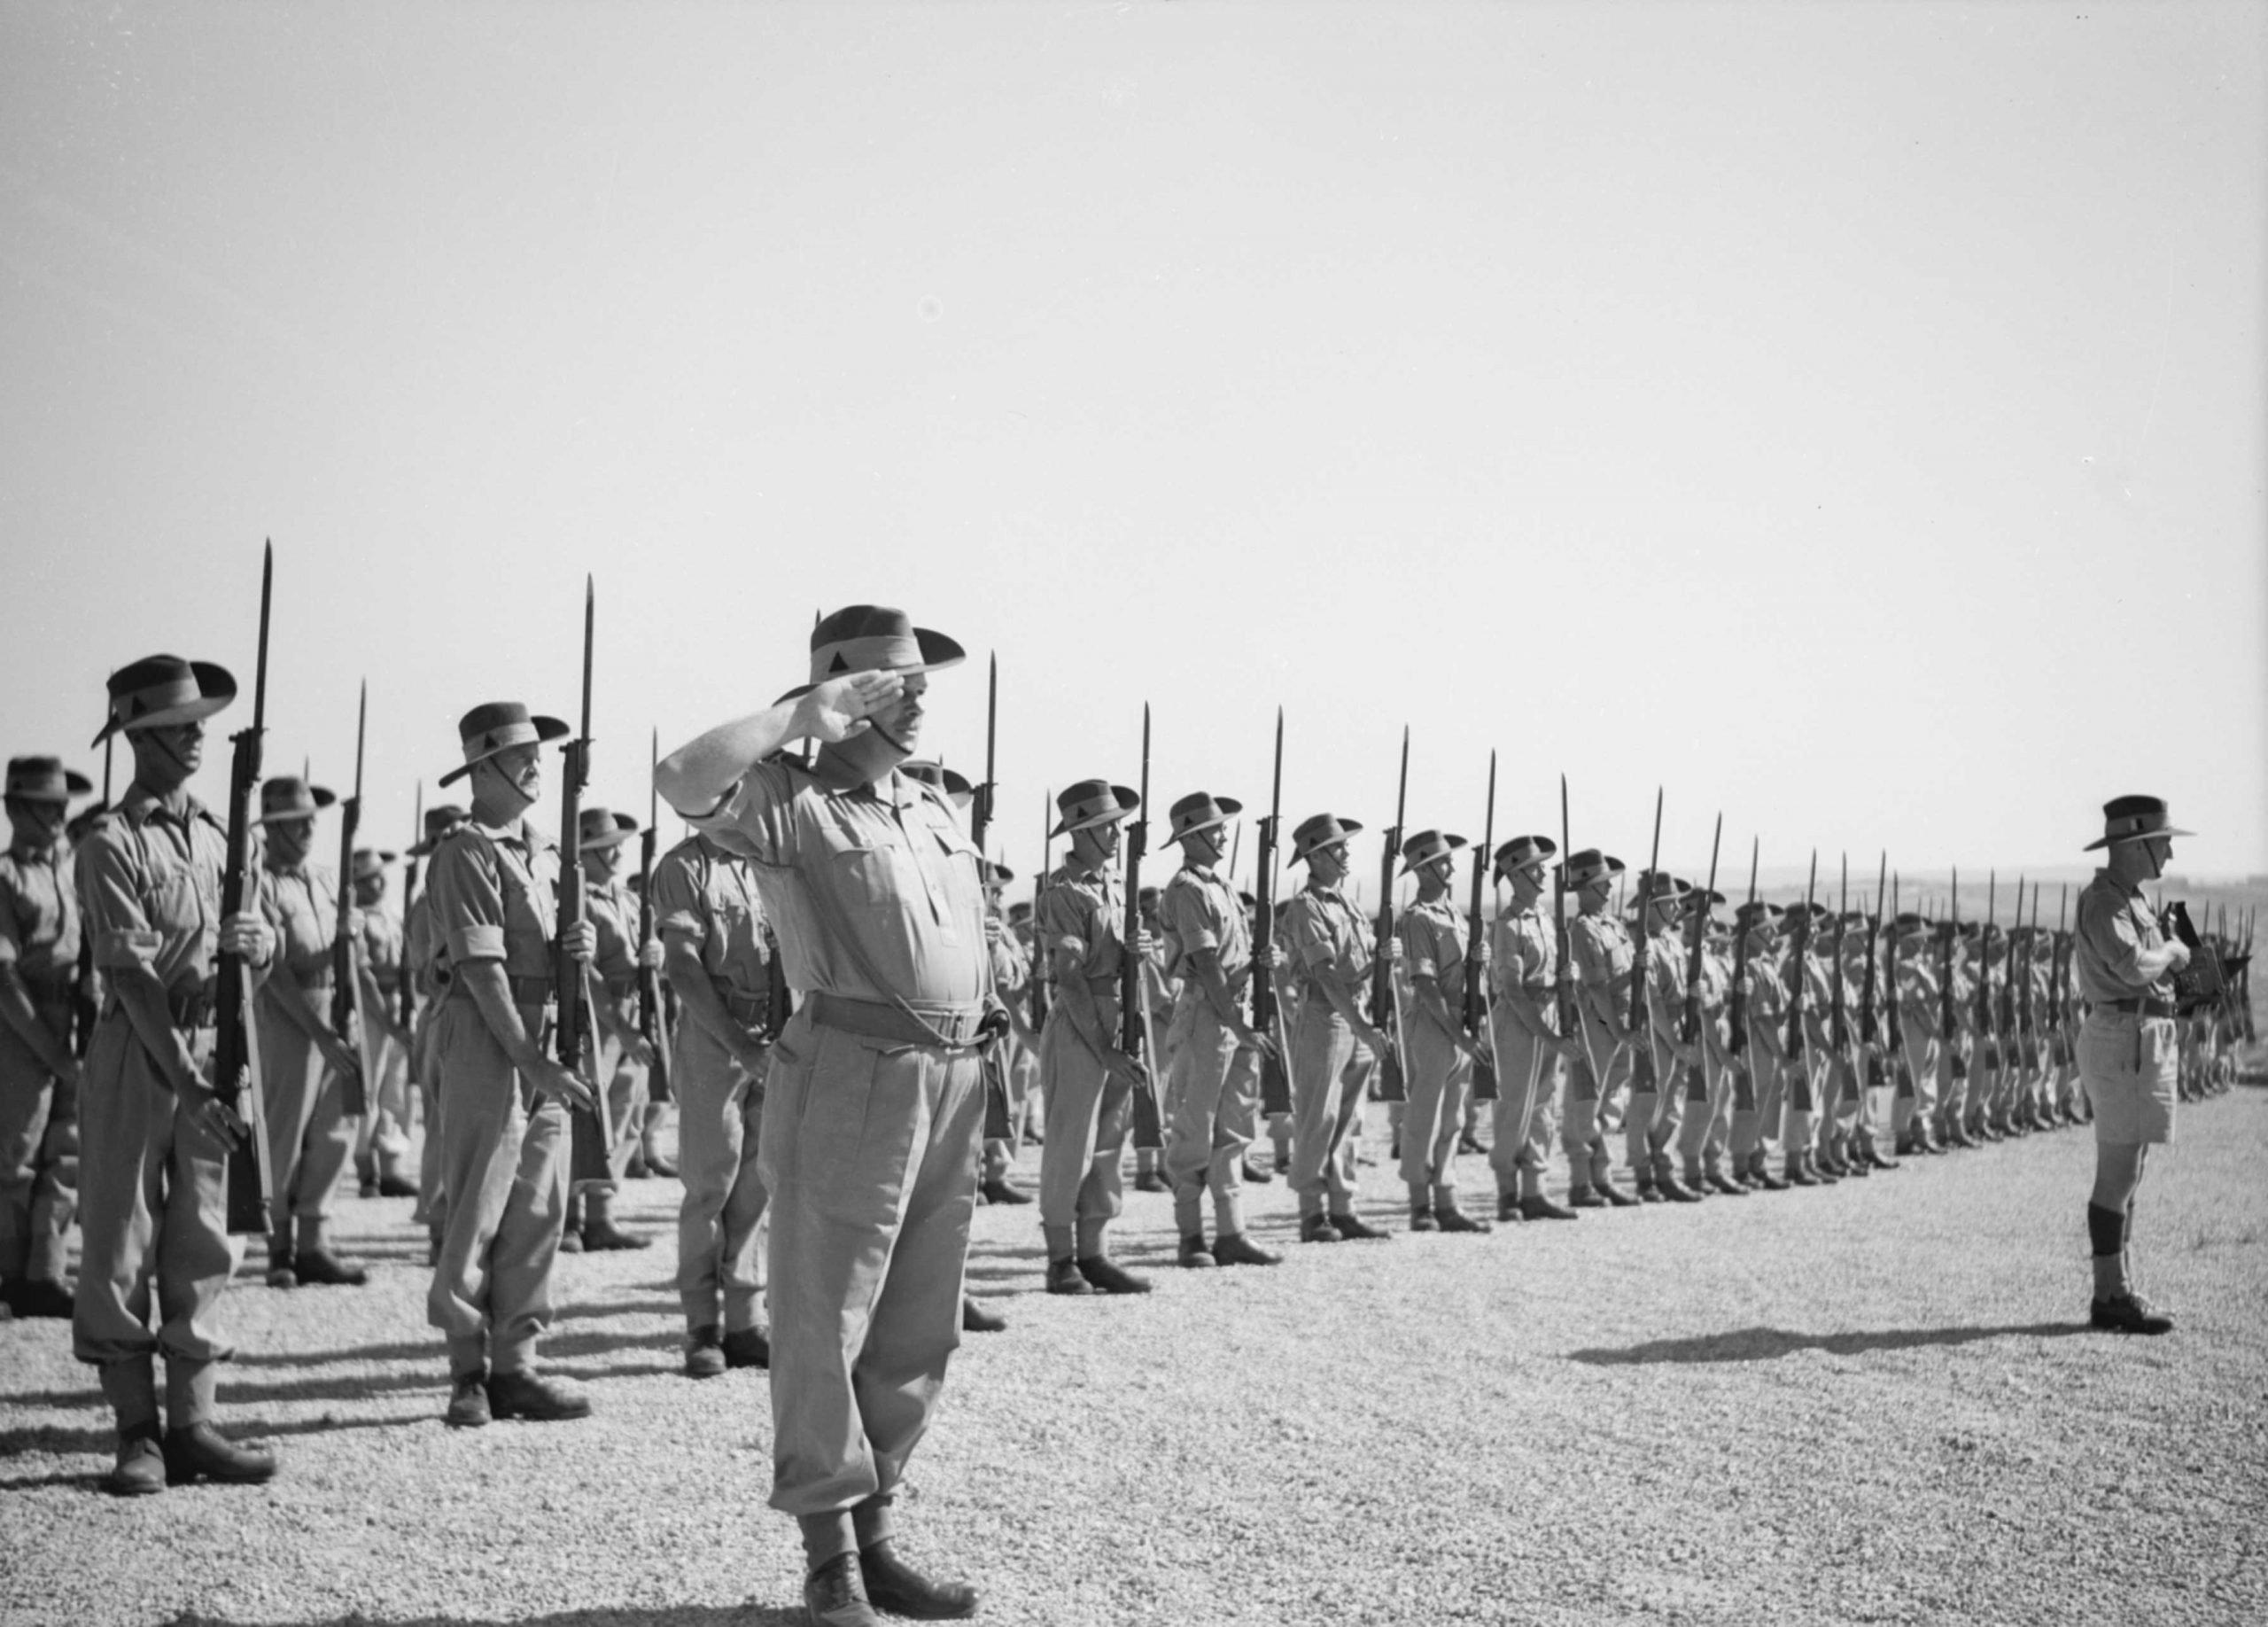 Australian soldiers and officers